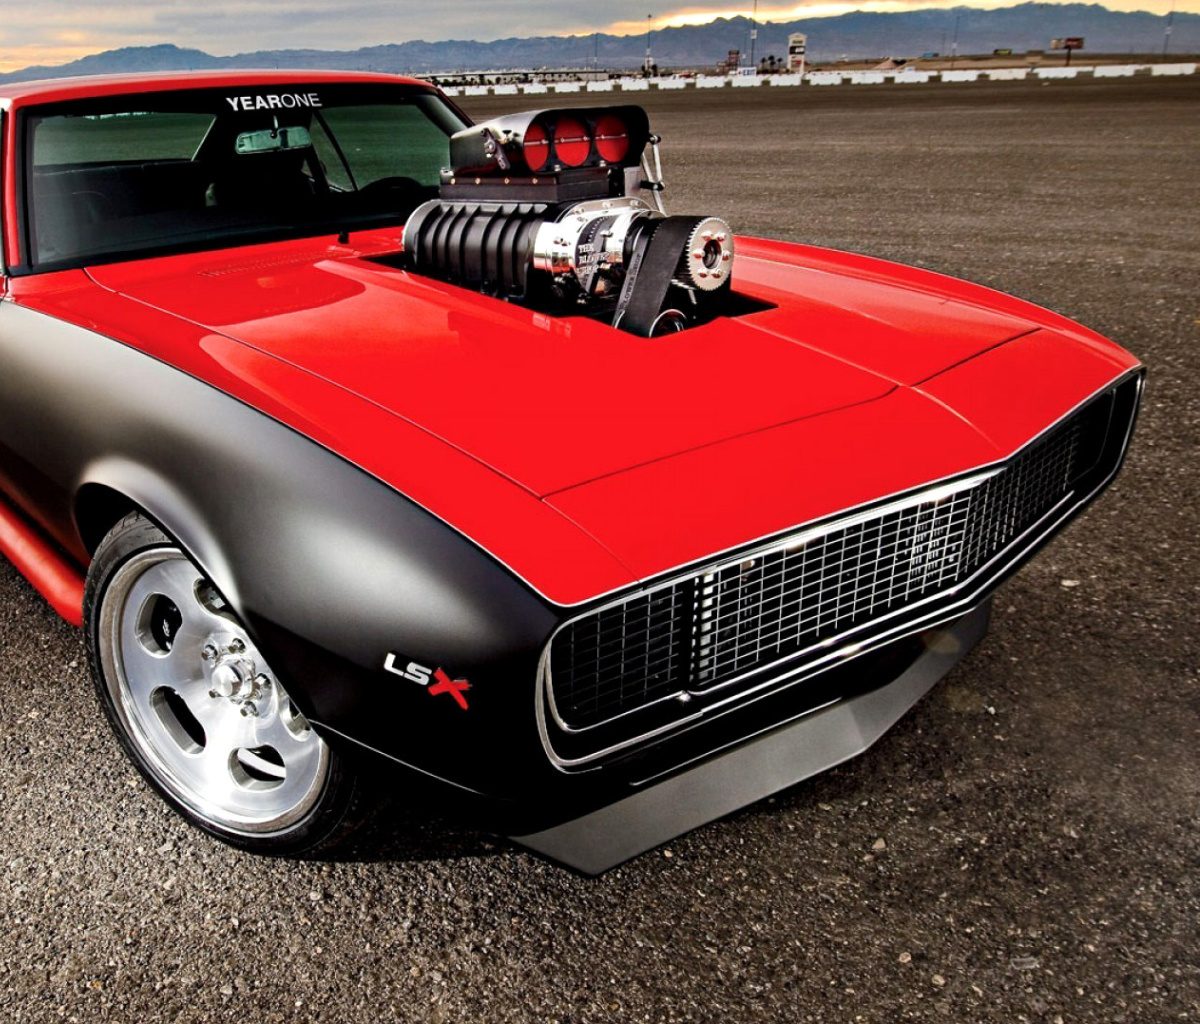 Sfondi Chevrolet Hot Rod Muscle Car with GM Engine 1200x1024